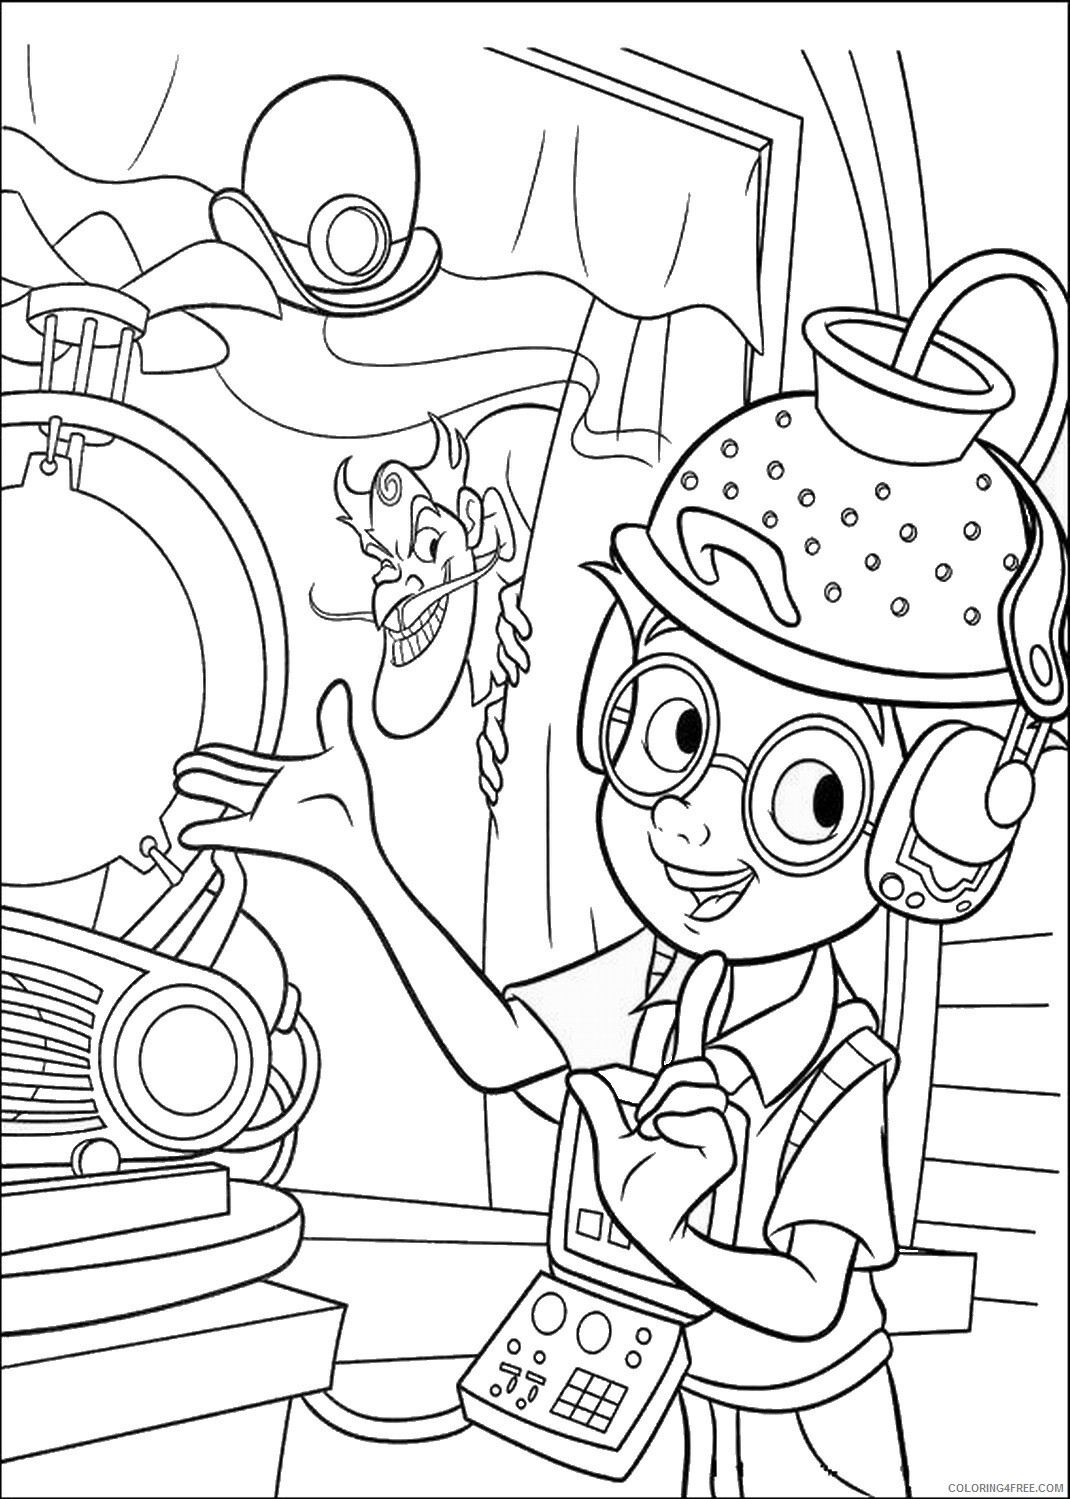 Meet the Robinsons Coloring Pages TV Film Printable 2020 04980 Coloring4free